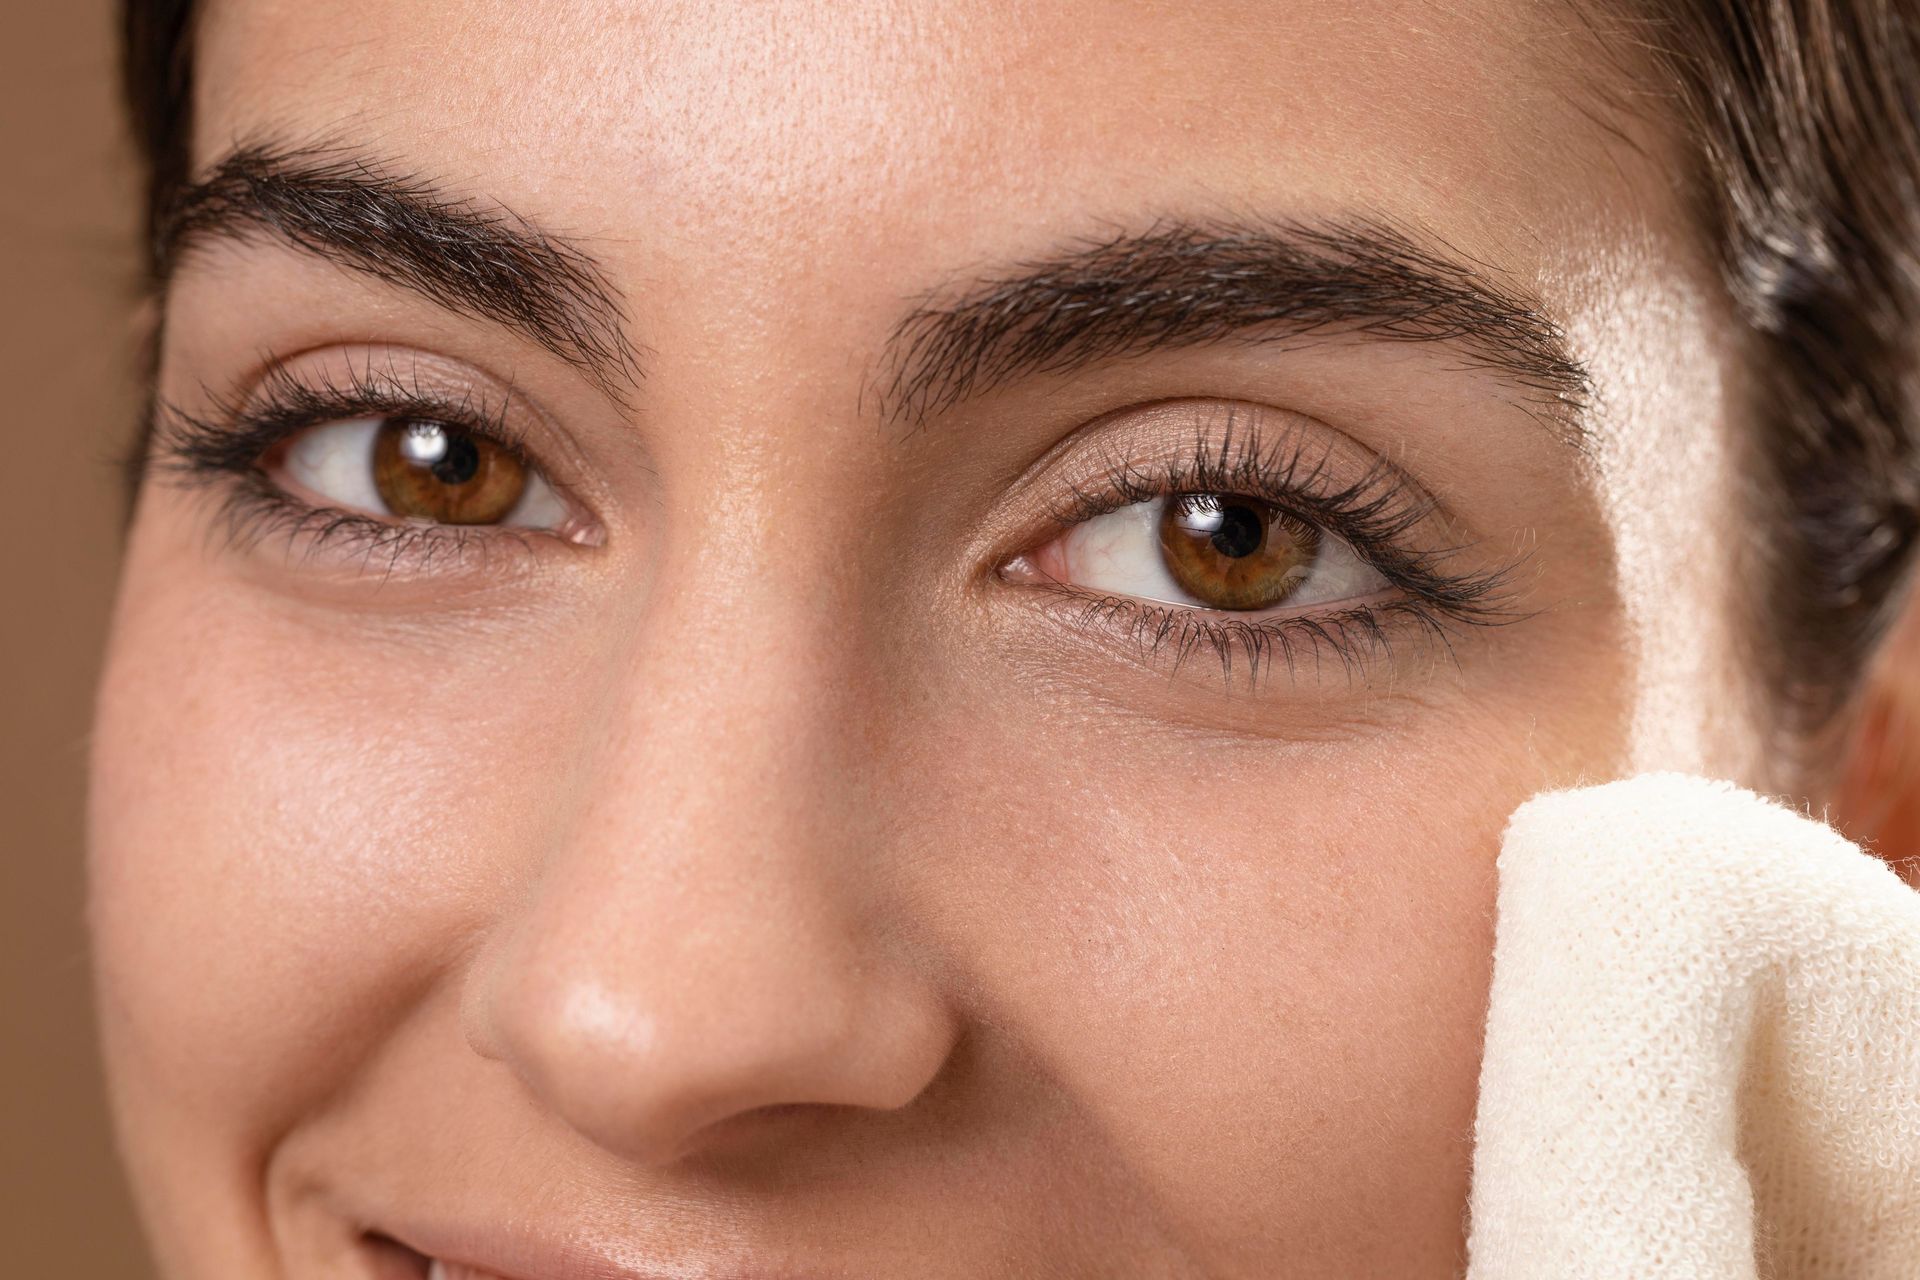 a woman is cleaning her face with a towel